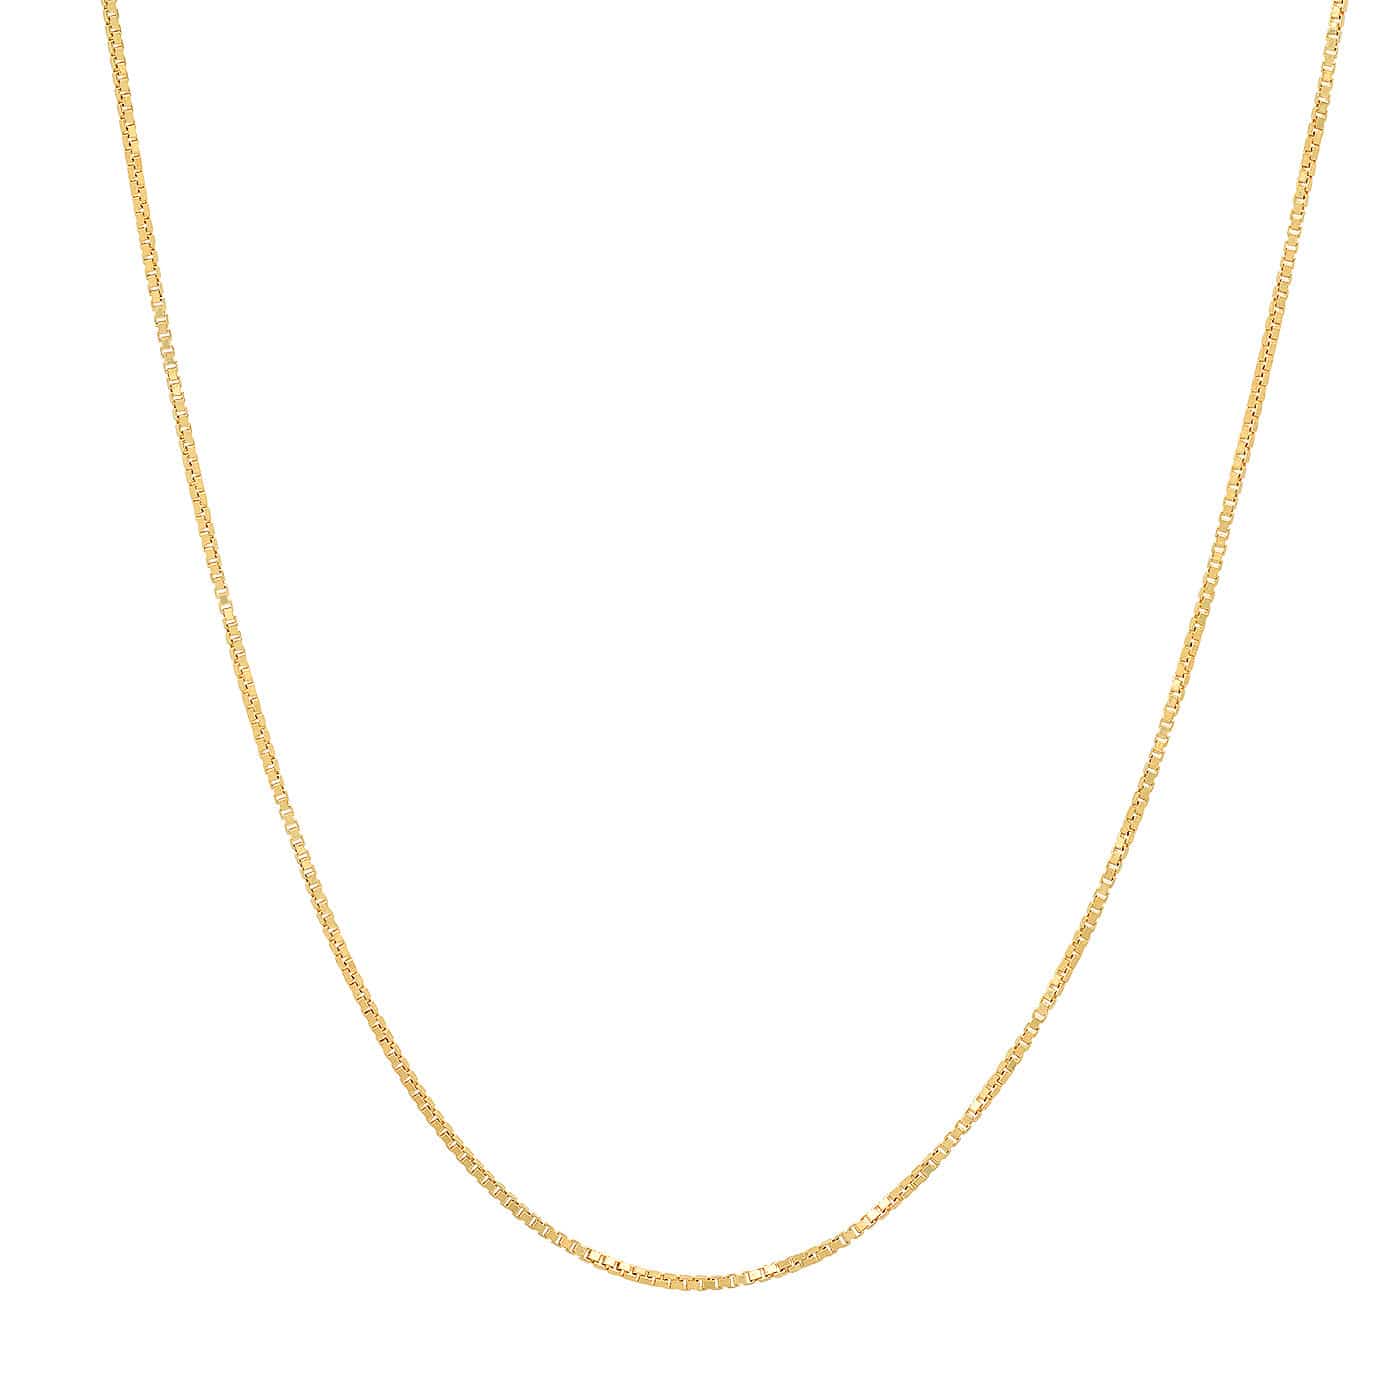 Tai Jewelry Necklace Simple Gold Vermeil Box Chain